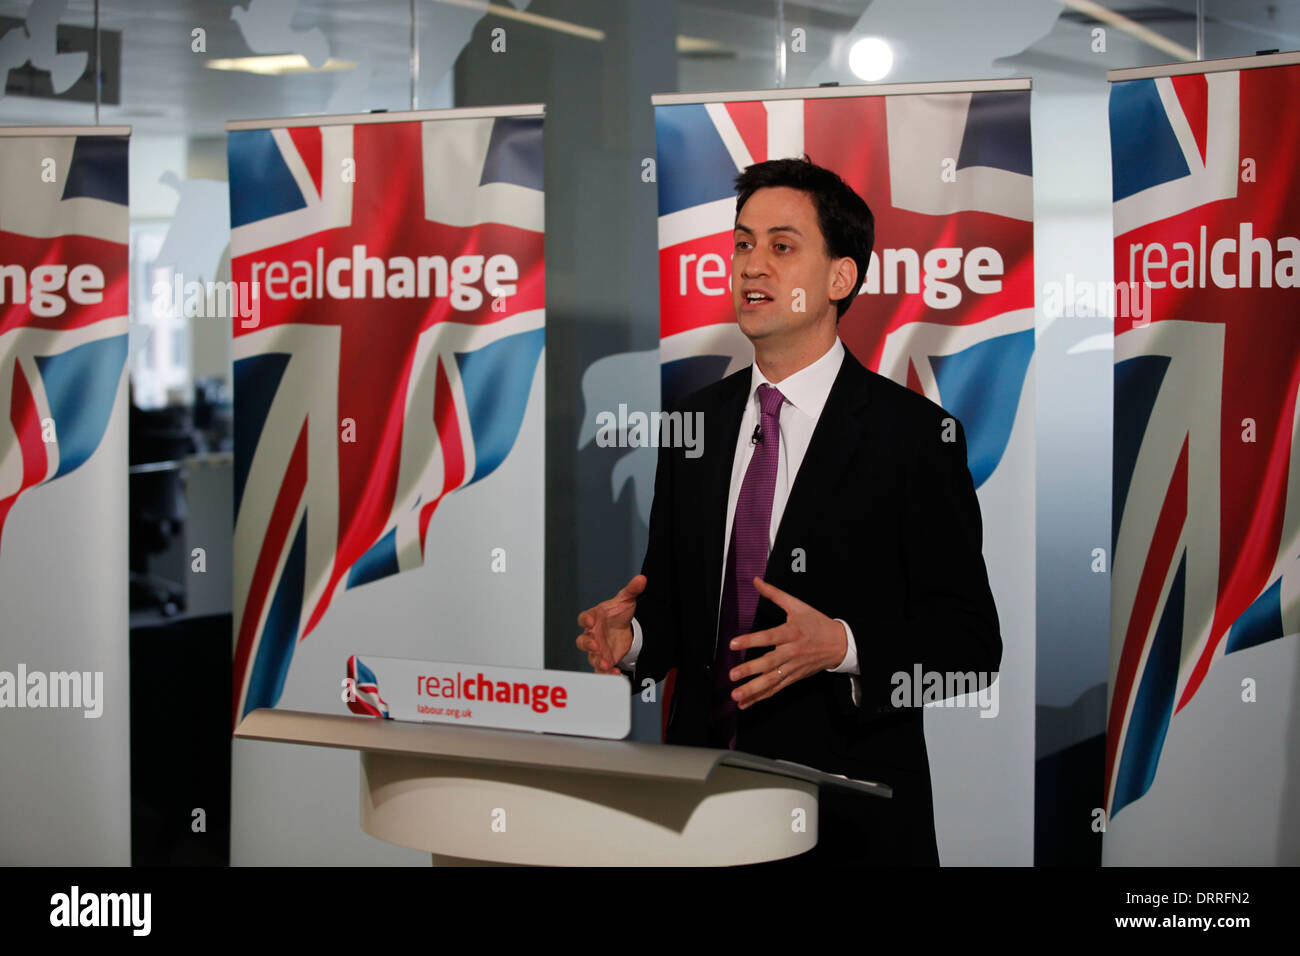 Ed Miliband, Leader of the Labour Party, delivers a speech on banking at Co-operative Bank in London 09 July 2012. Stock Photo